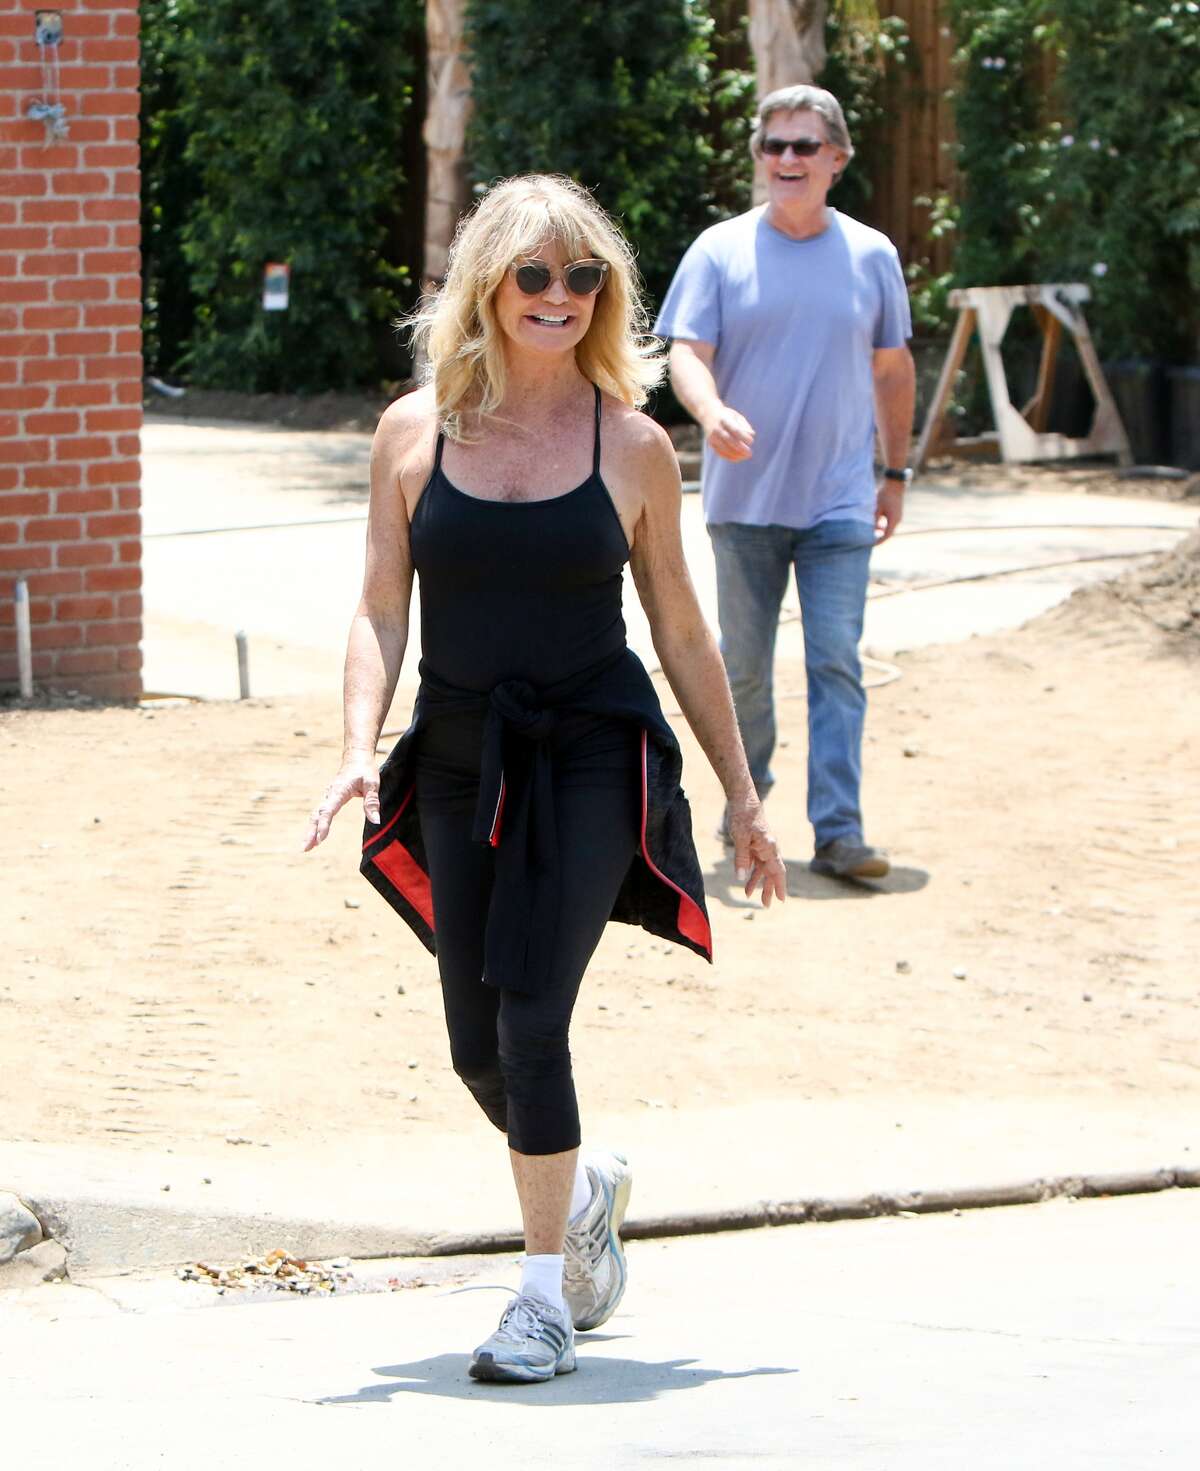 Goldie Hawn and Kurt Russell are seen on June 25, 2016 in Los Angeles, California. KEEP CLICKING FOR A THEN-AND-NOW LOOK AT STARS WHO WERE HOT IN THE 1970s WHO ARE NOW IN THEIR 70s.